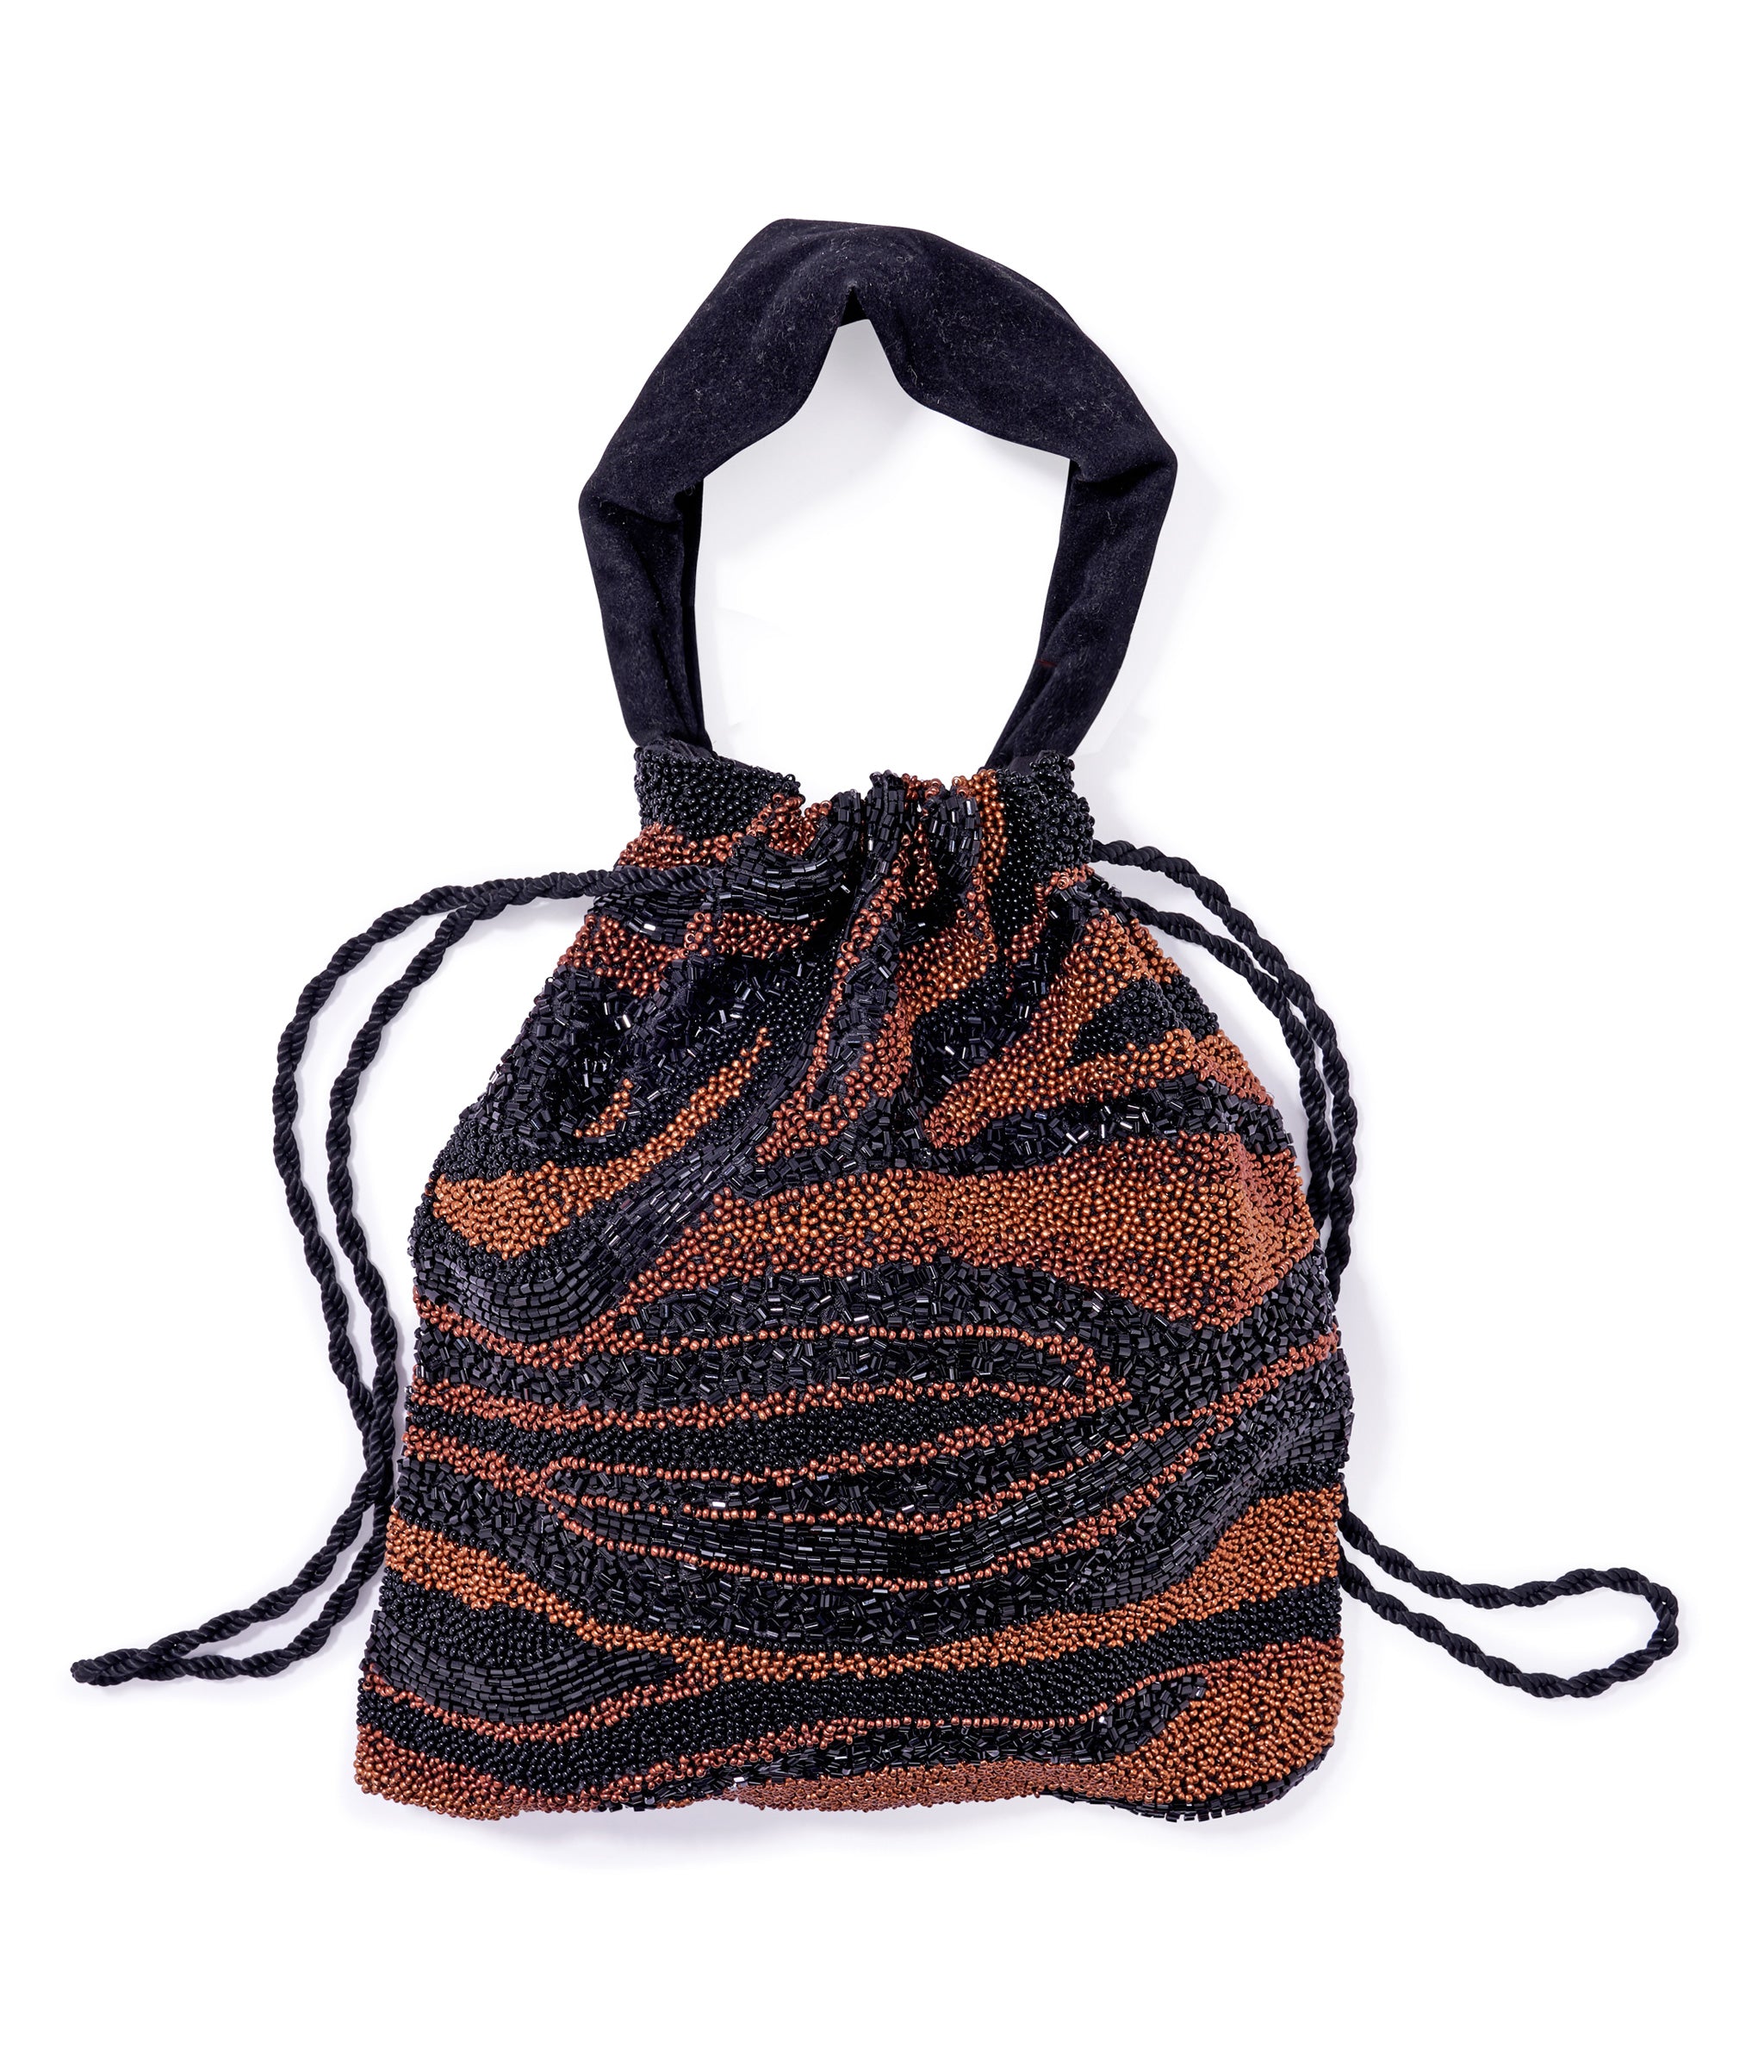 Gala Bag in Black and Brown Zebra. Beaded evening purse with zebra-print, twist cord closure and black velvet handle. 